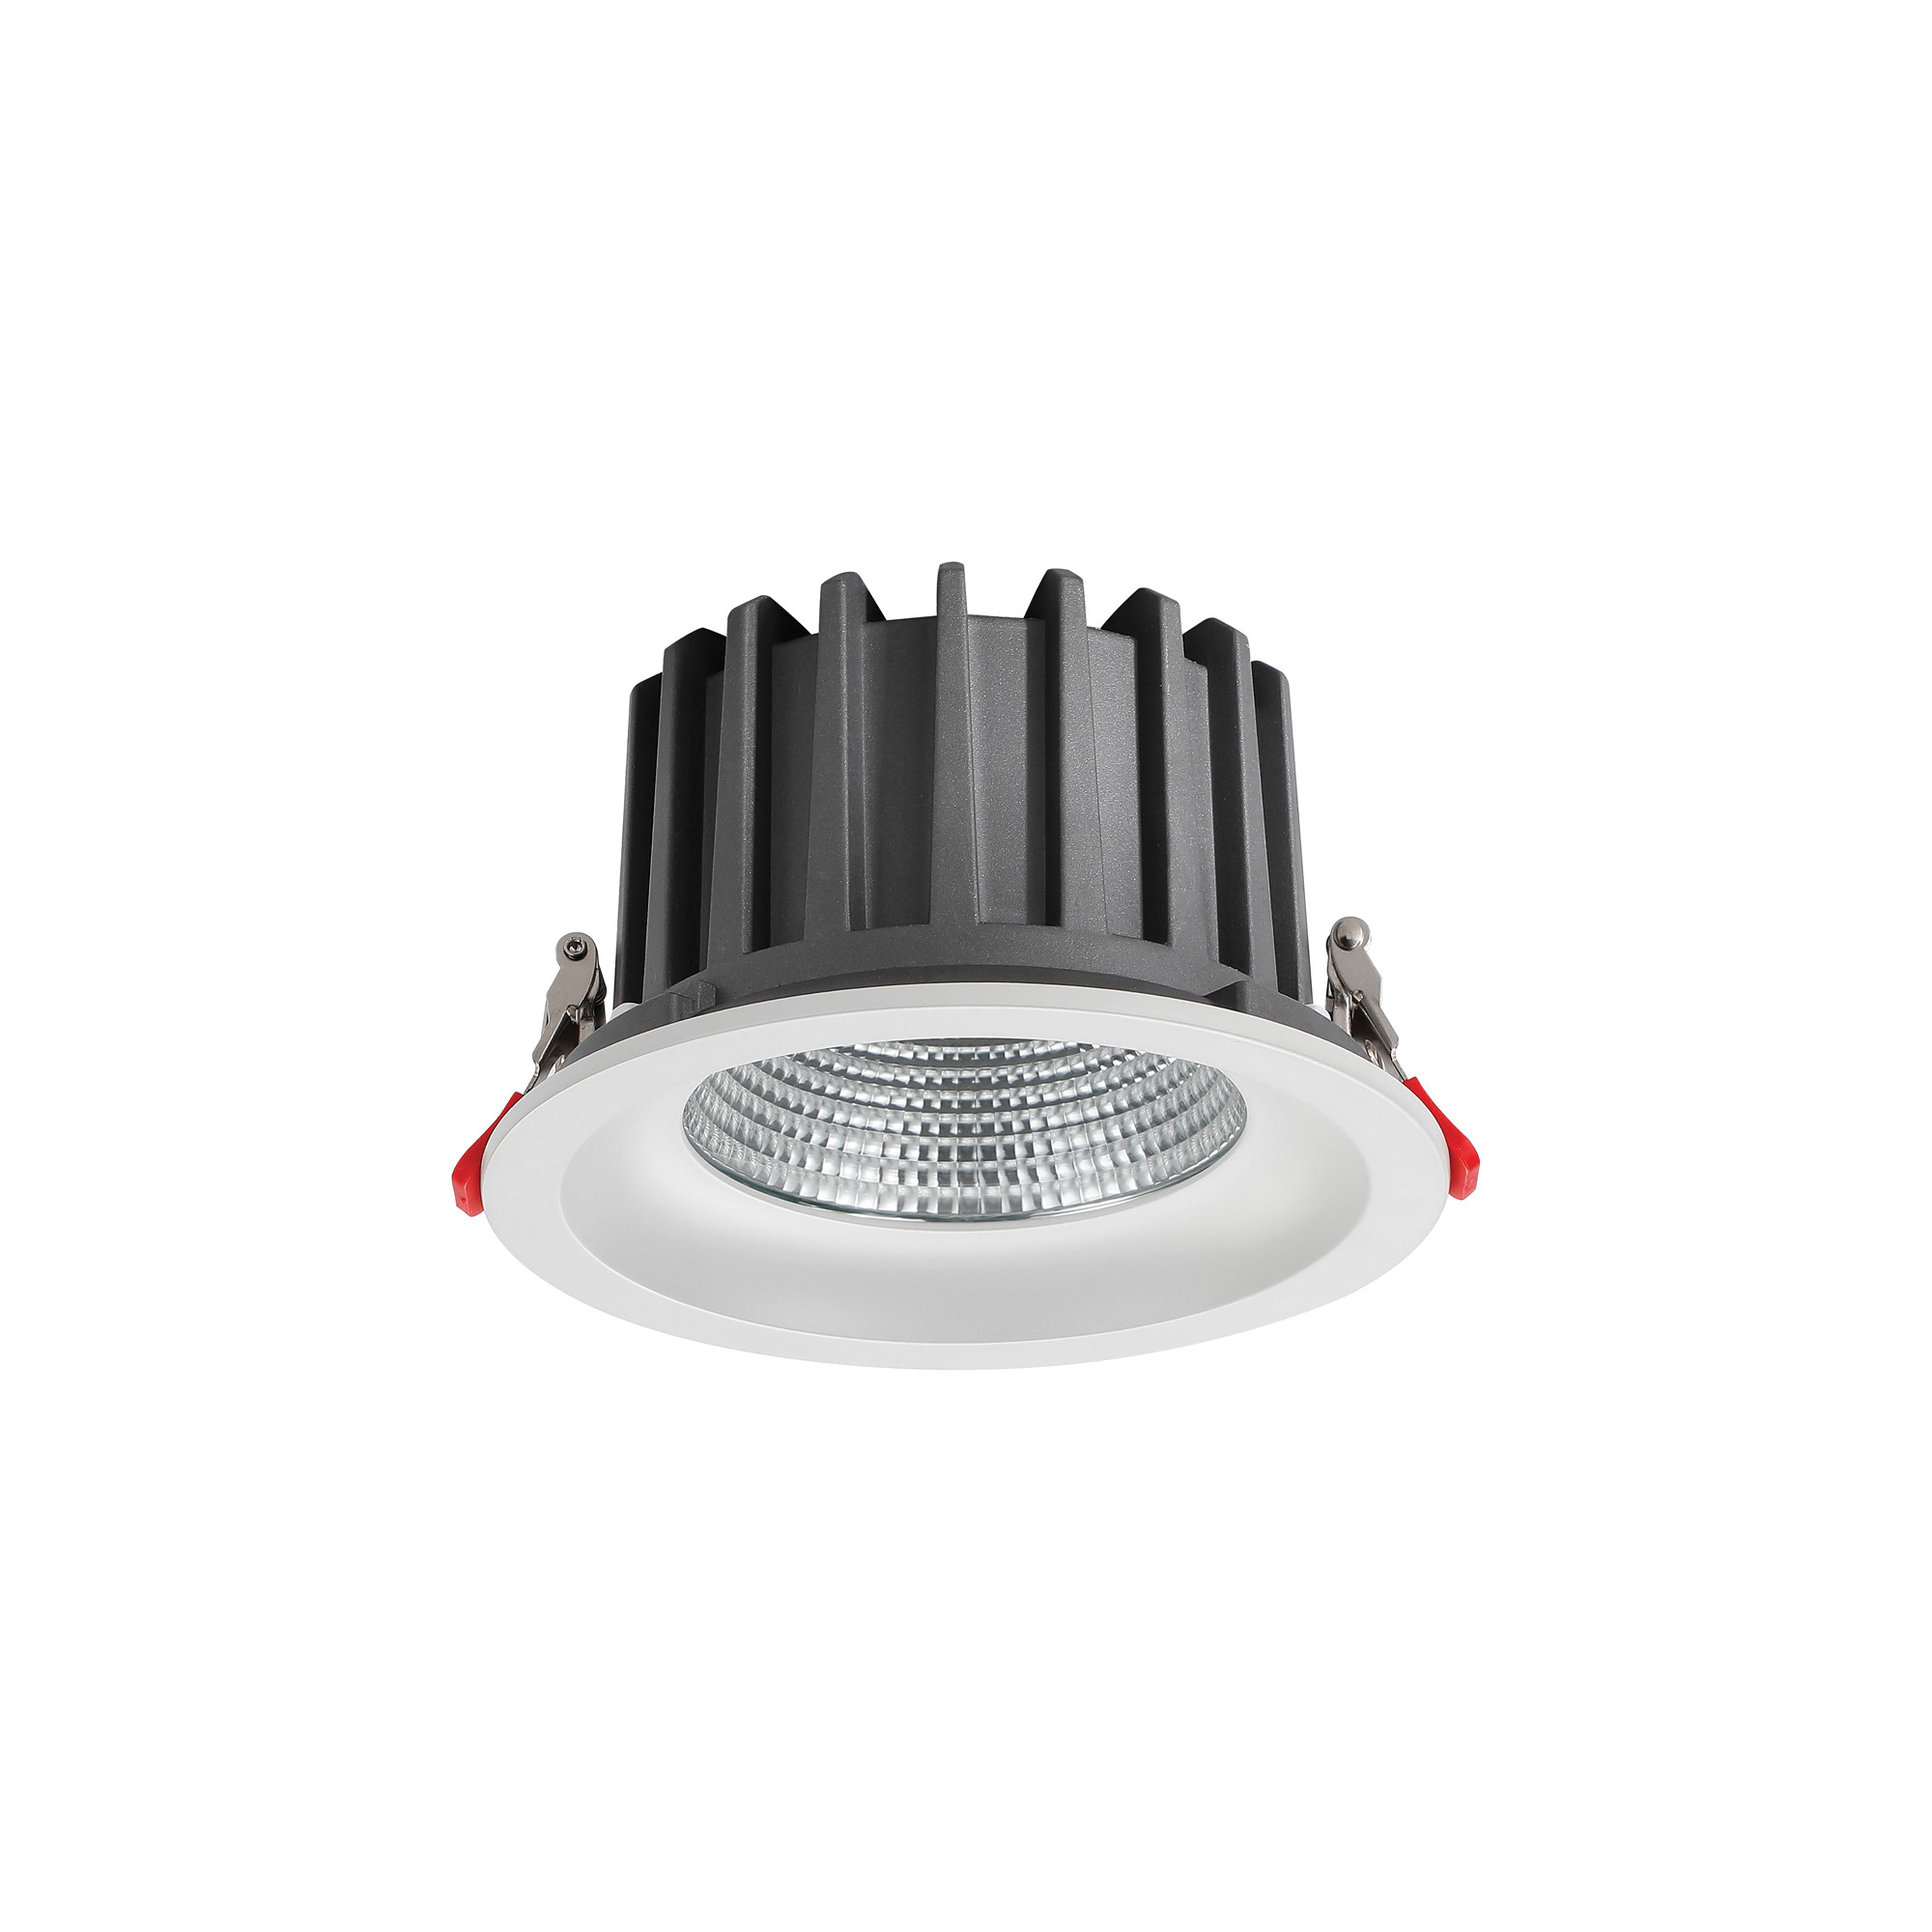 DL200059  Bionic 24, 24W, 700mA, White Deep Round Recessed Downlight, 1980lm ,Cut Out 155mm, 42° , 4000K, IP44, DRIVER INC., 5yrs Warranty.